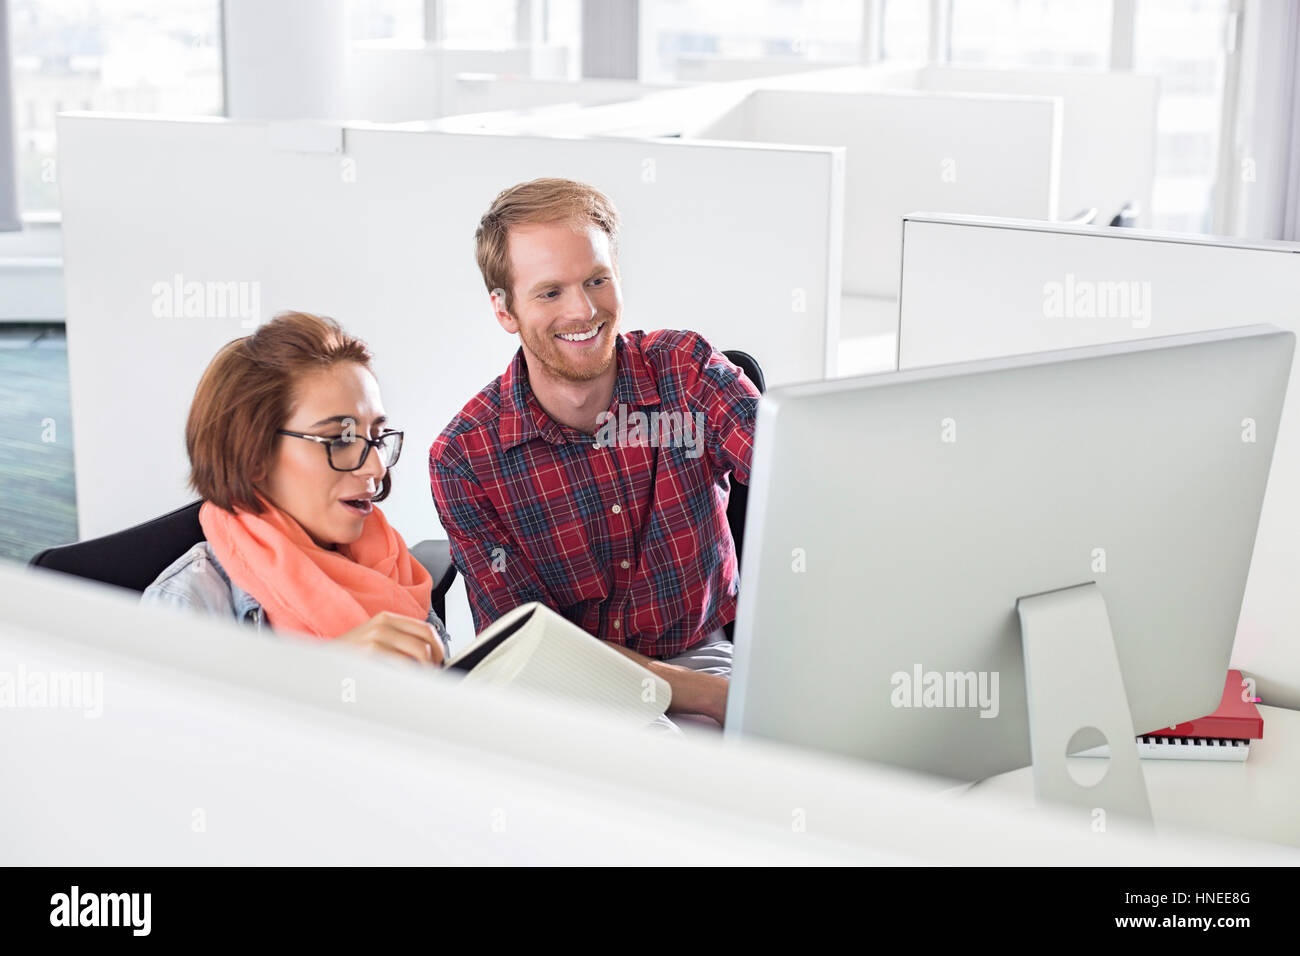 Businessman and businesswoman using computer in creative office Banque D'Images